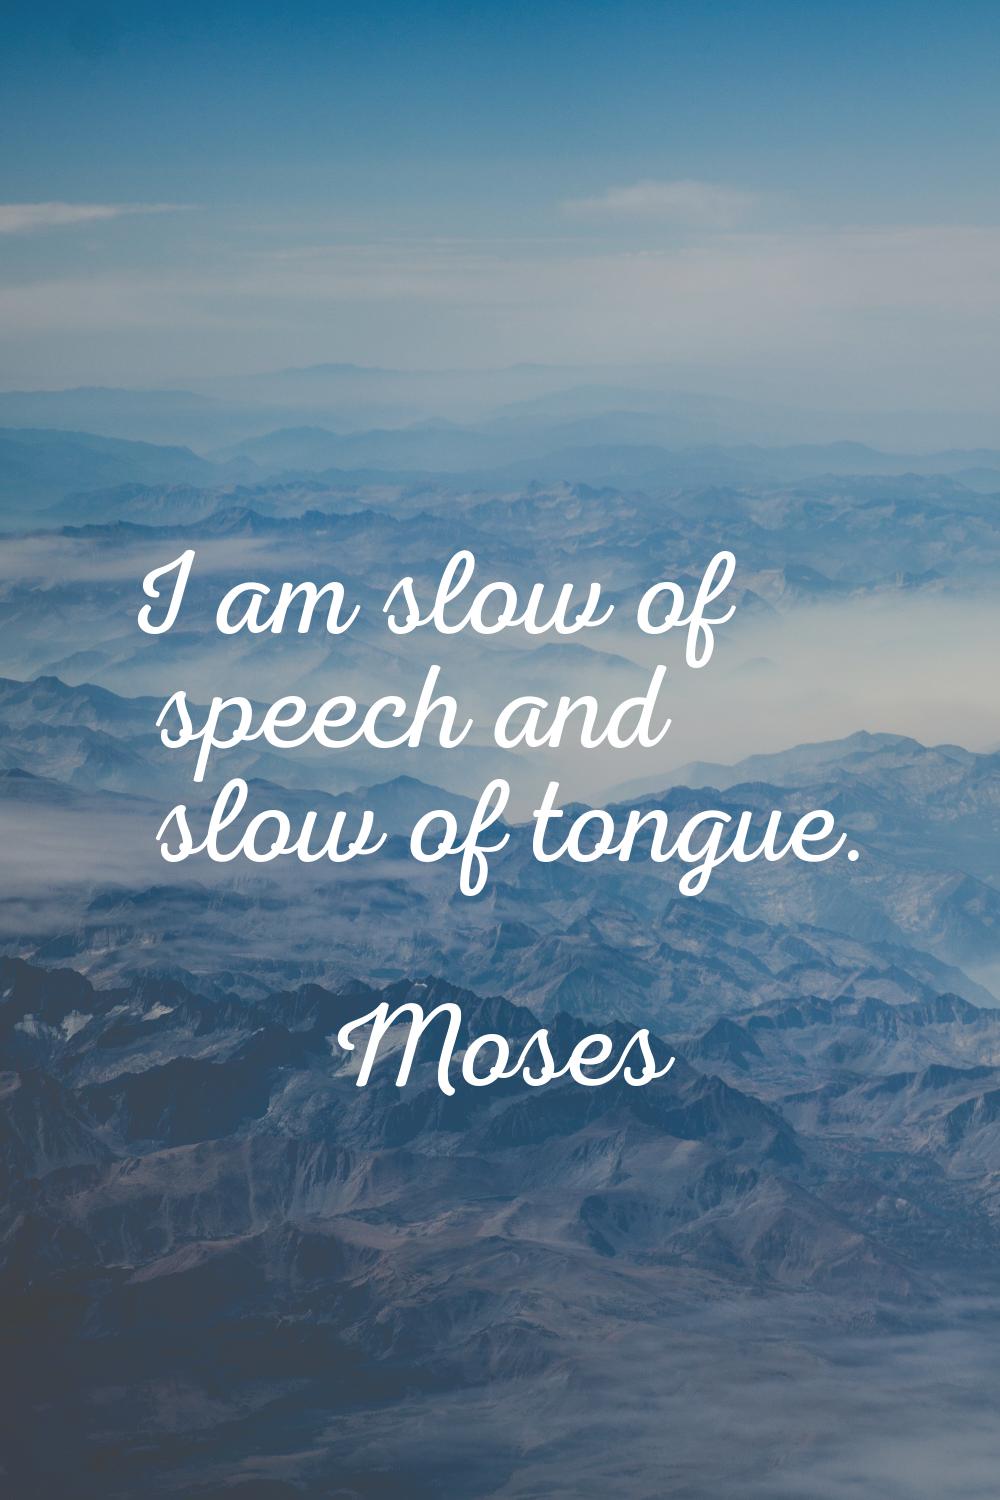 I am slow of speech and slow of tongue.